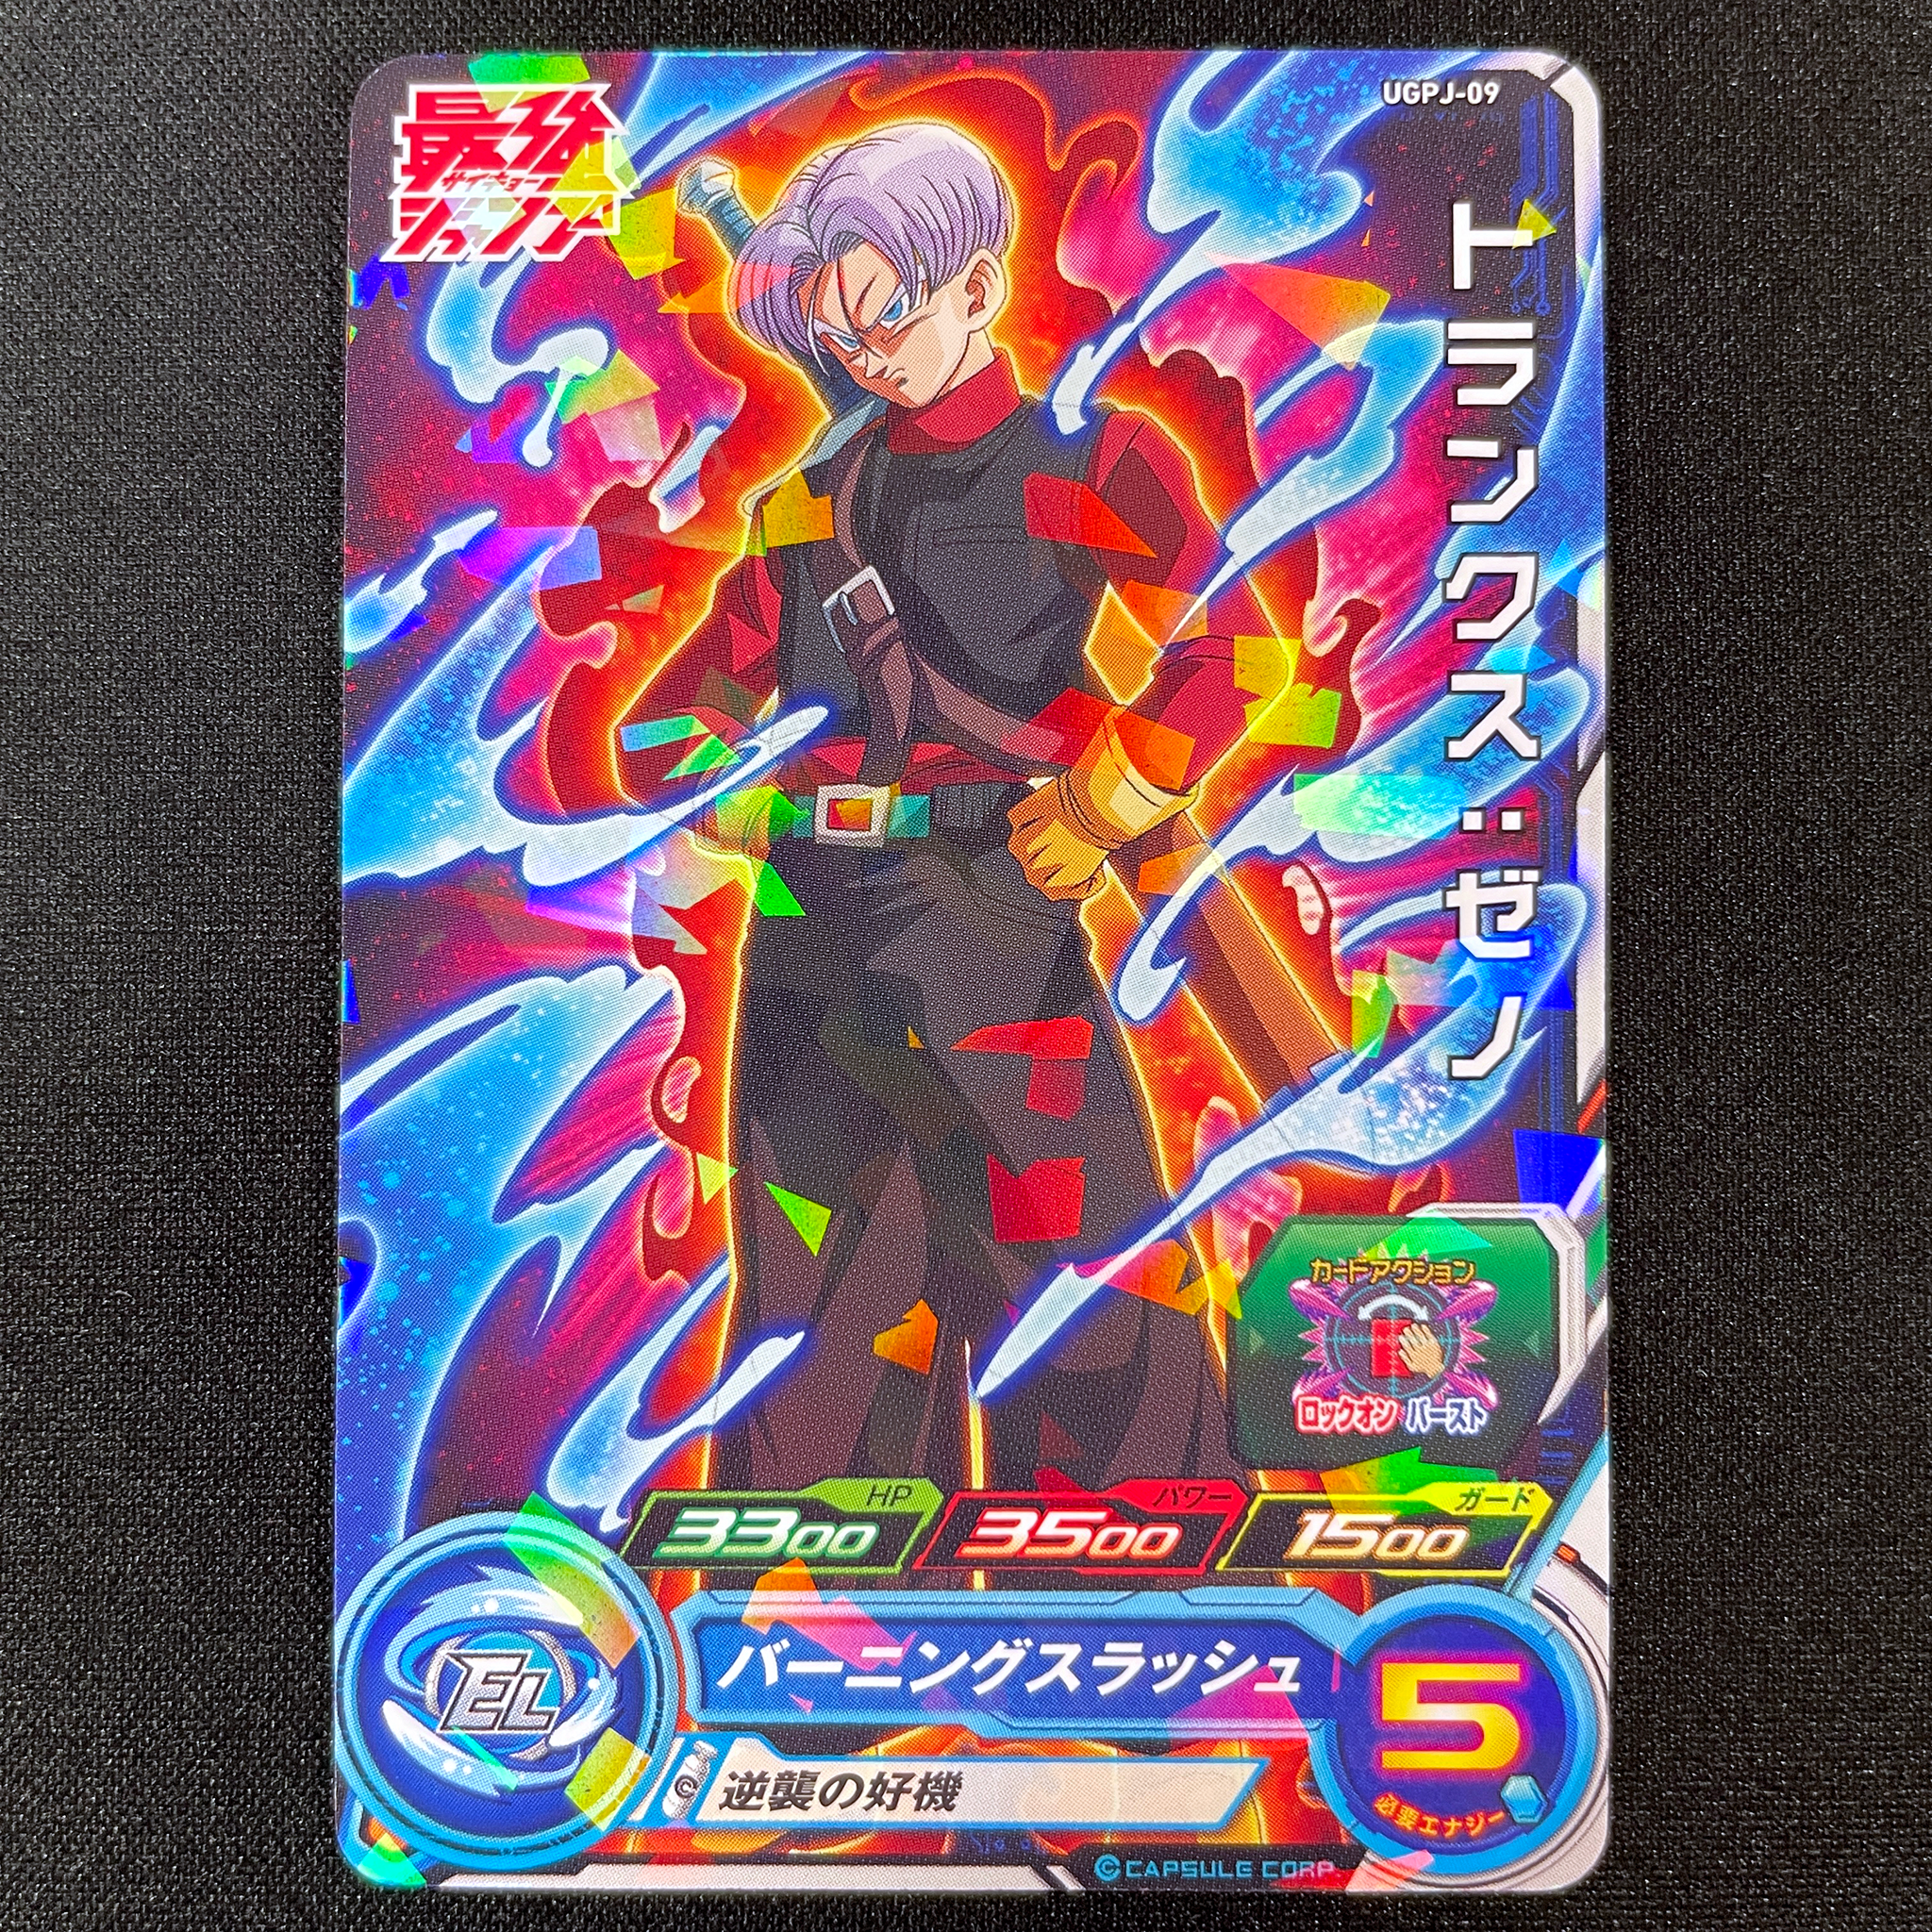 SUPER DRAGON BALL HEROES UGPJ-09  Promotional card sold with the July 2022 issue of Saikyo Jump magazine released June 3 2022.  Trunks : Xeno